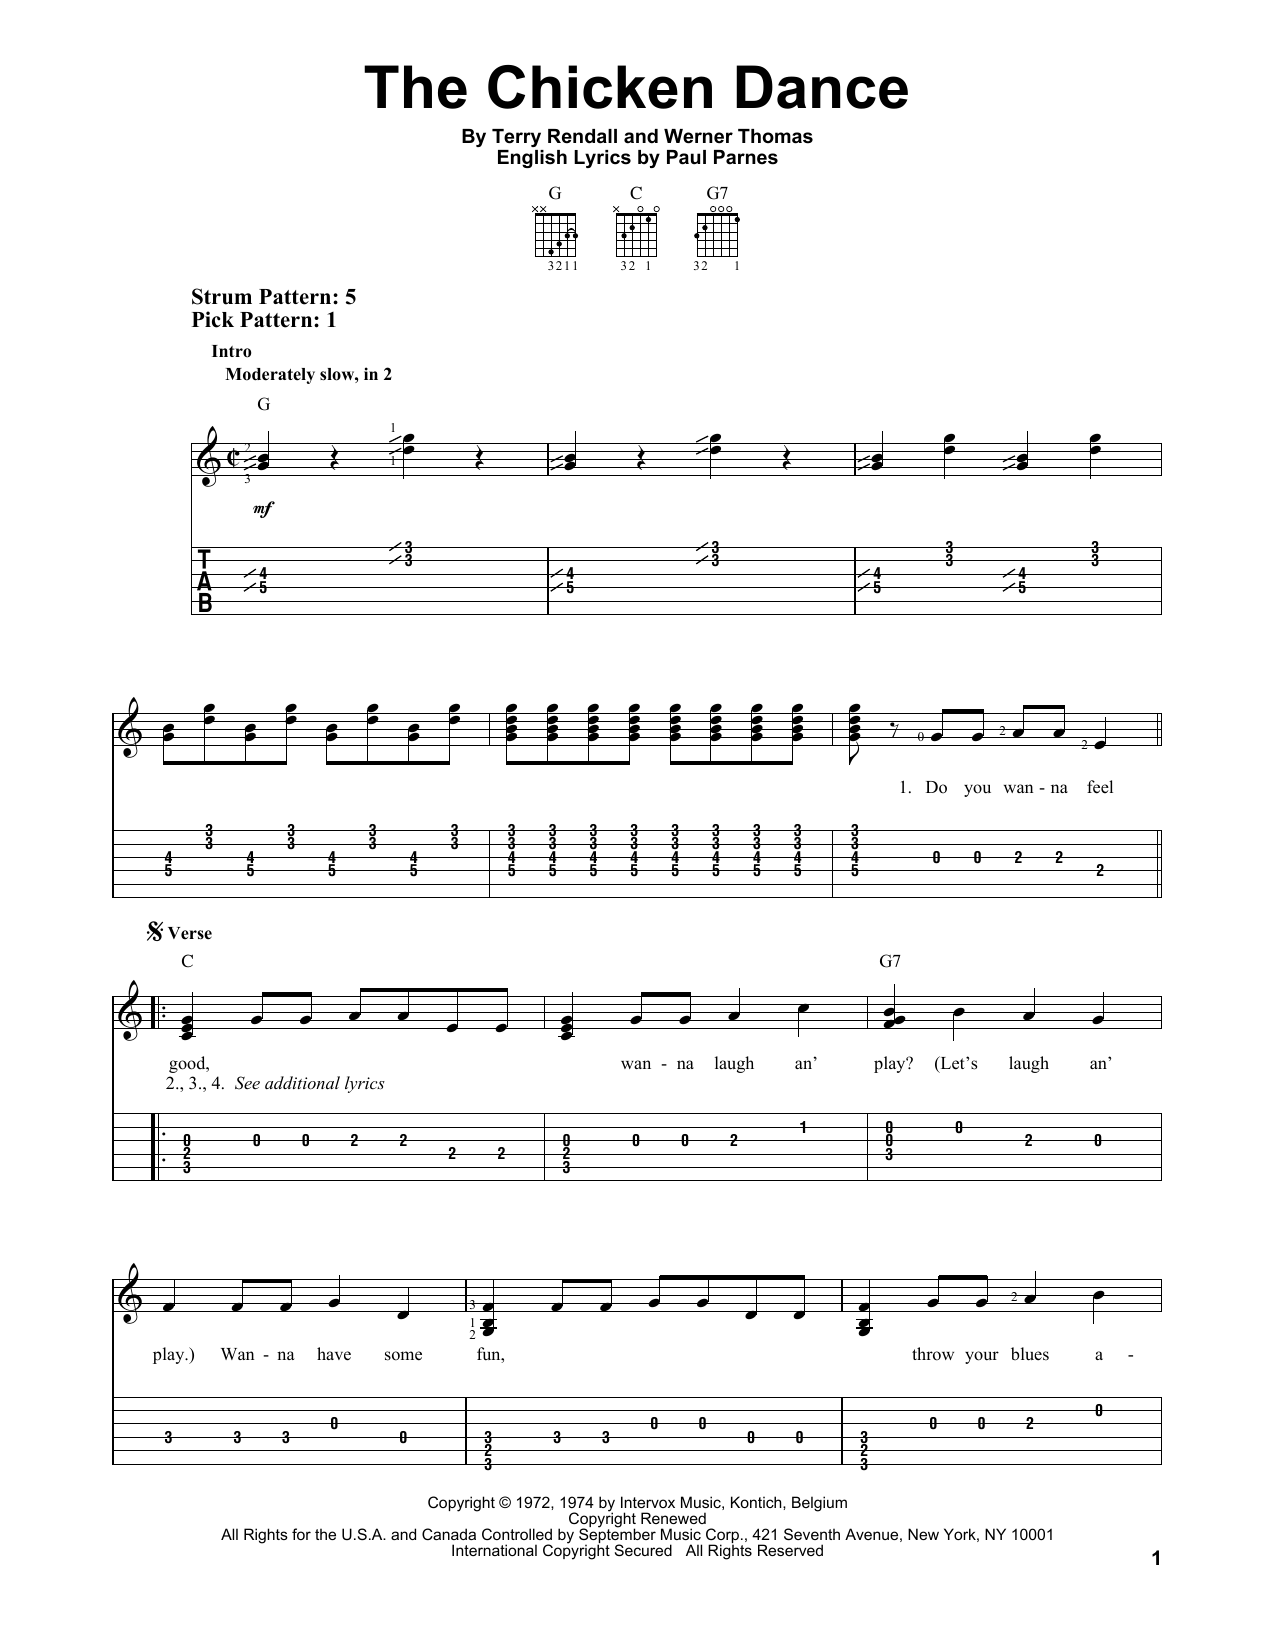 Download Terry Rendall The Chicken Dance Sheet Music